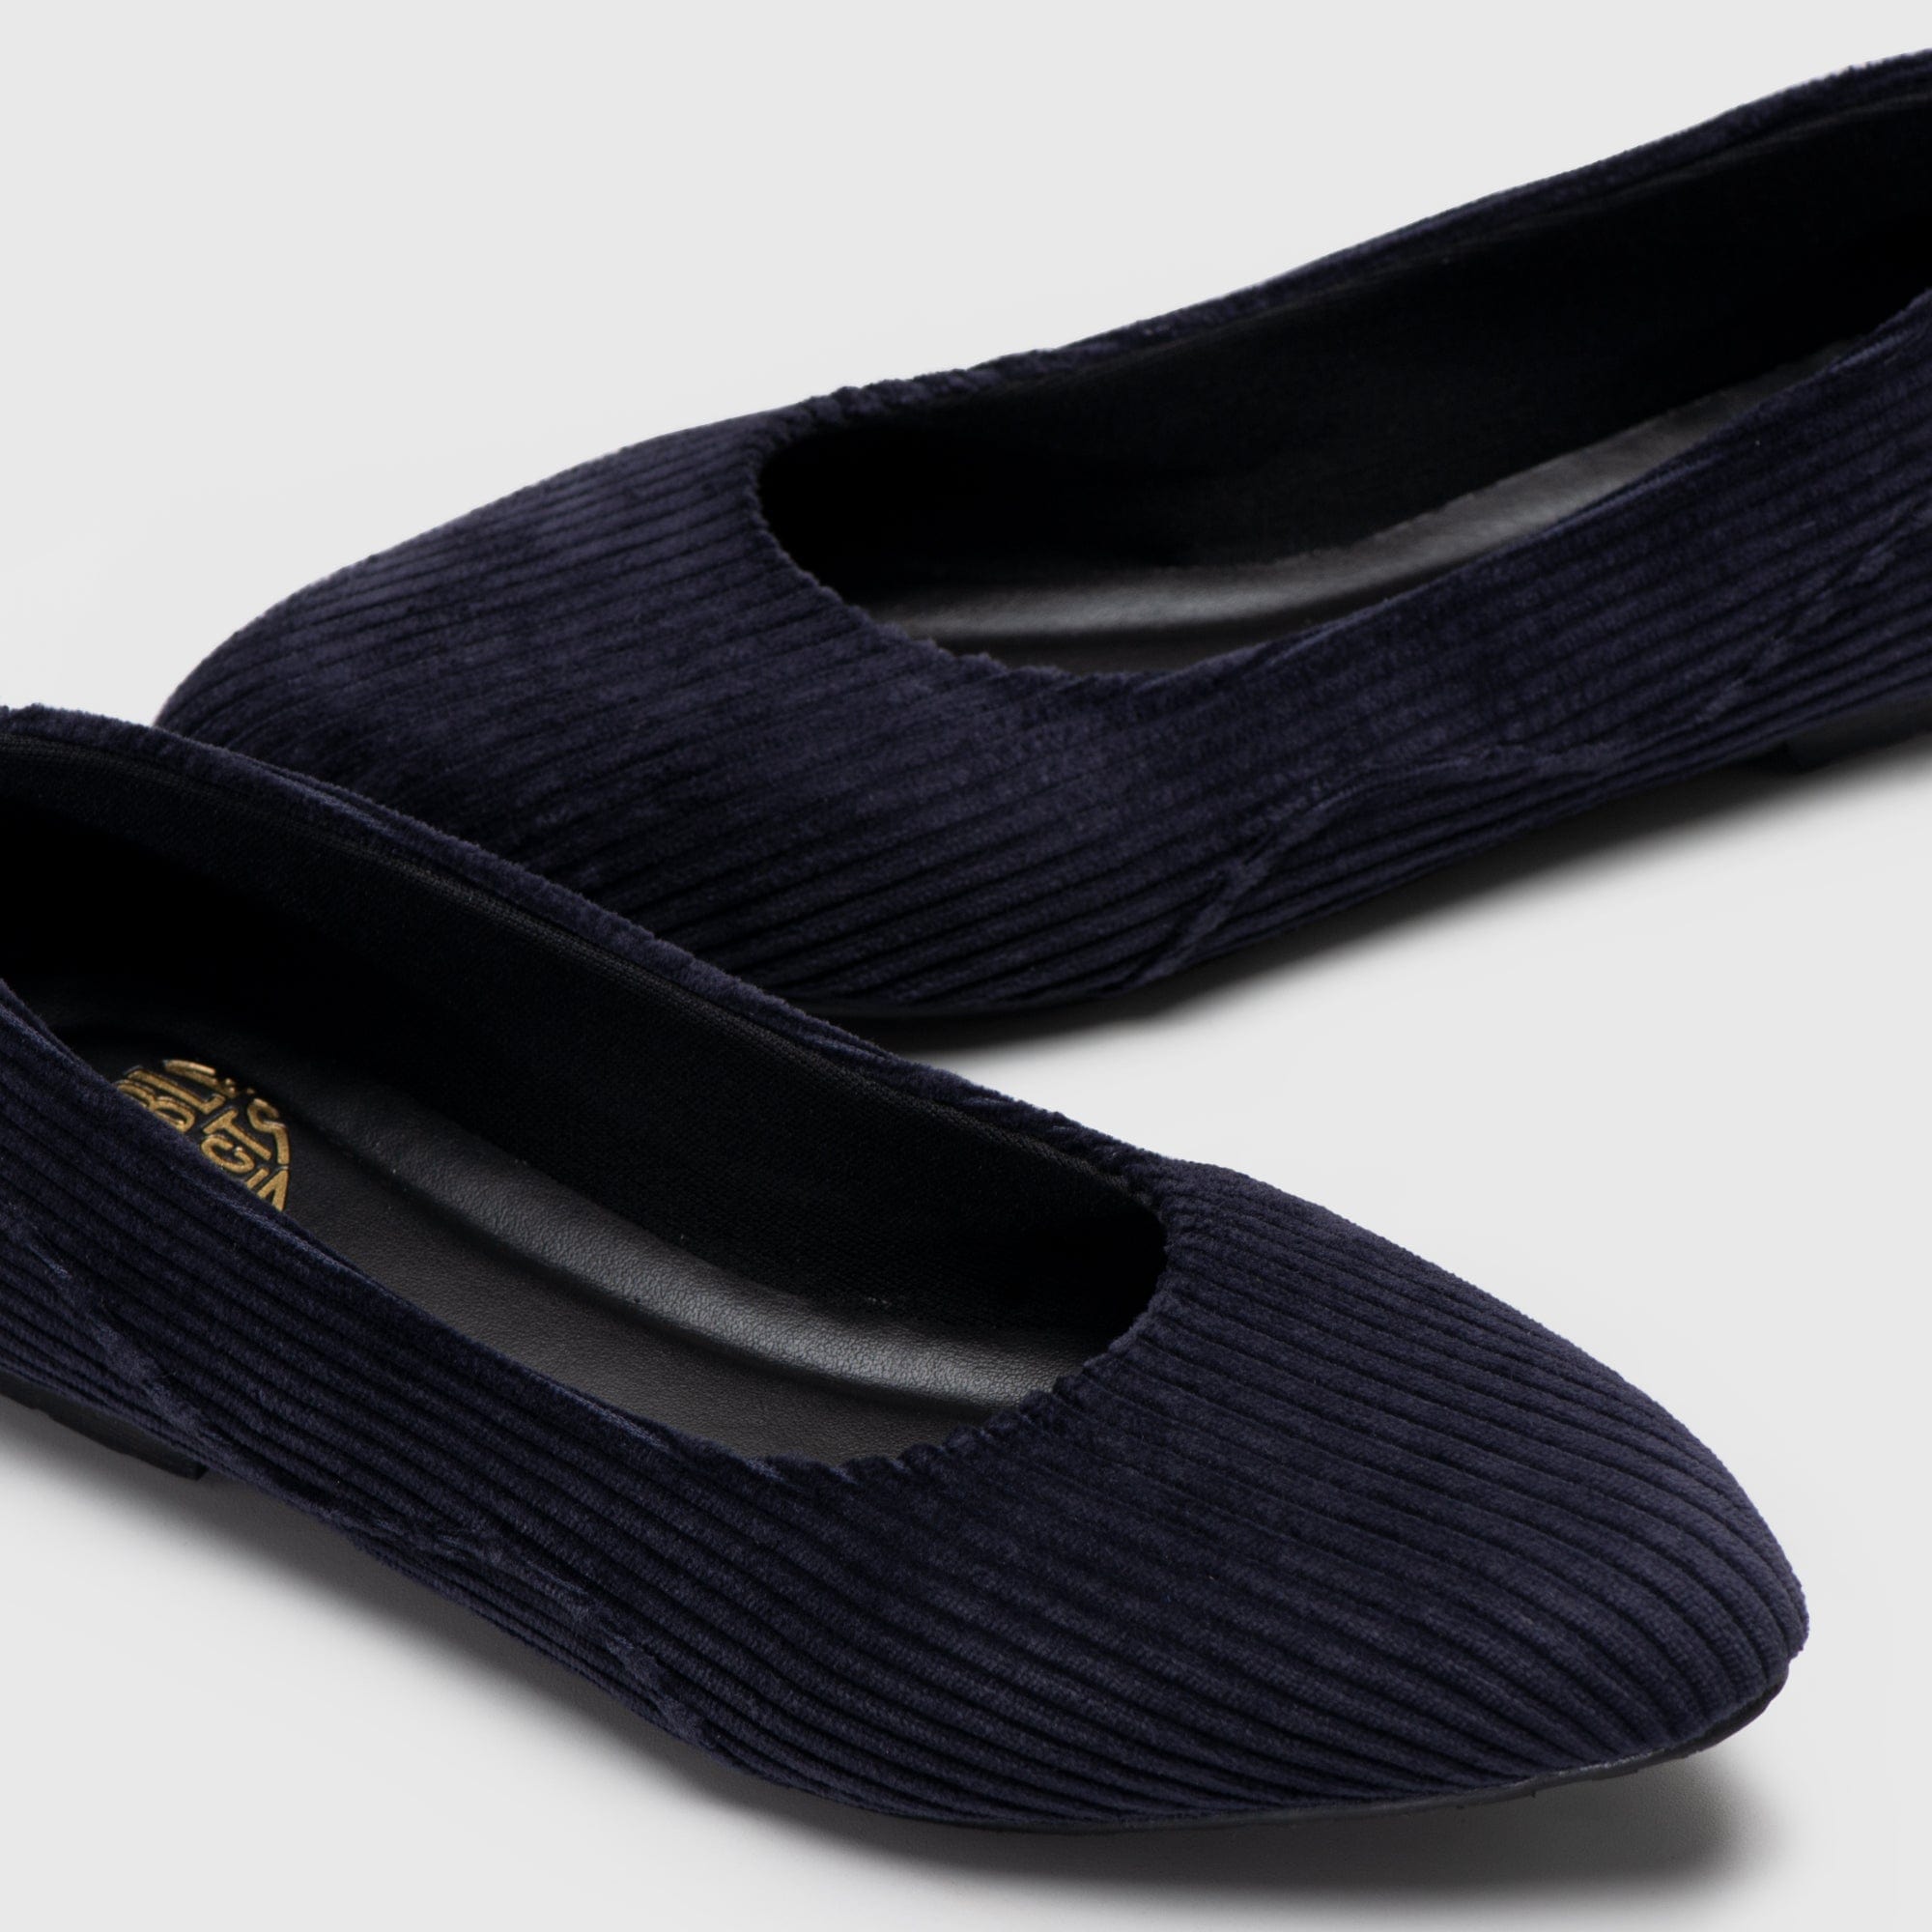 Adorable Projects Official Flat shoes Carson Flat Shoes Navy